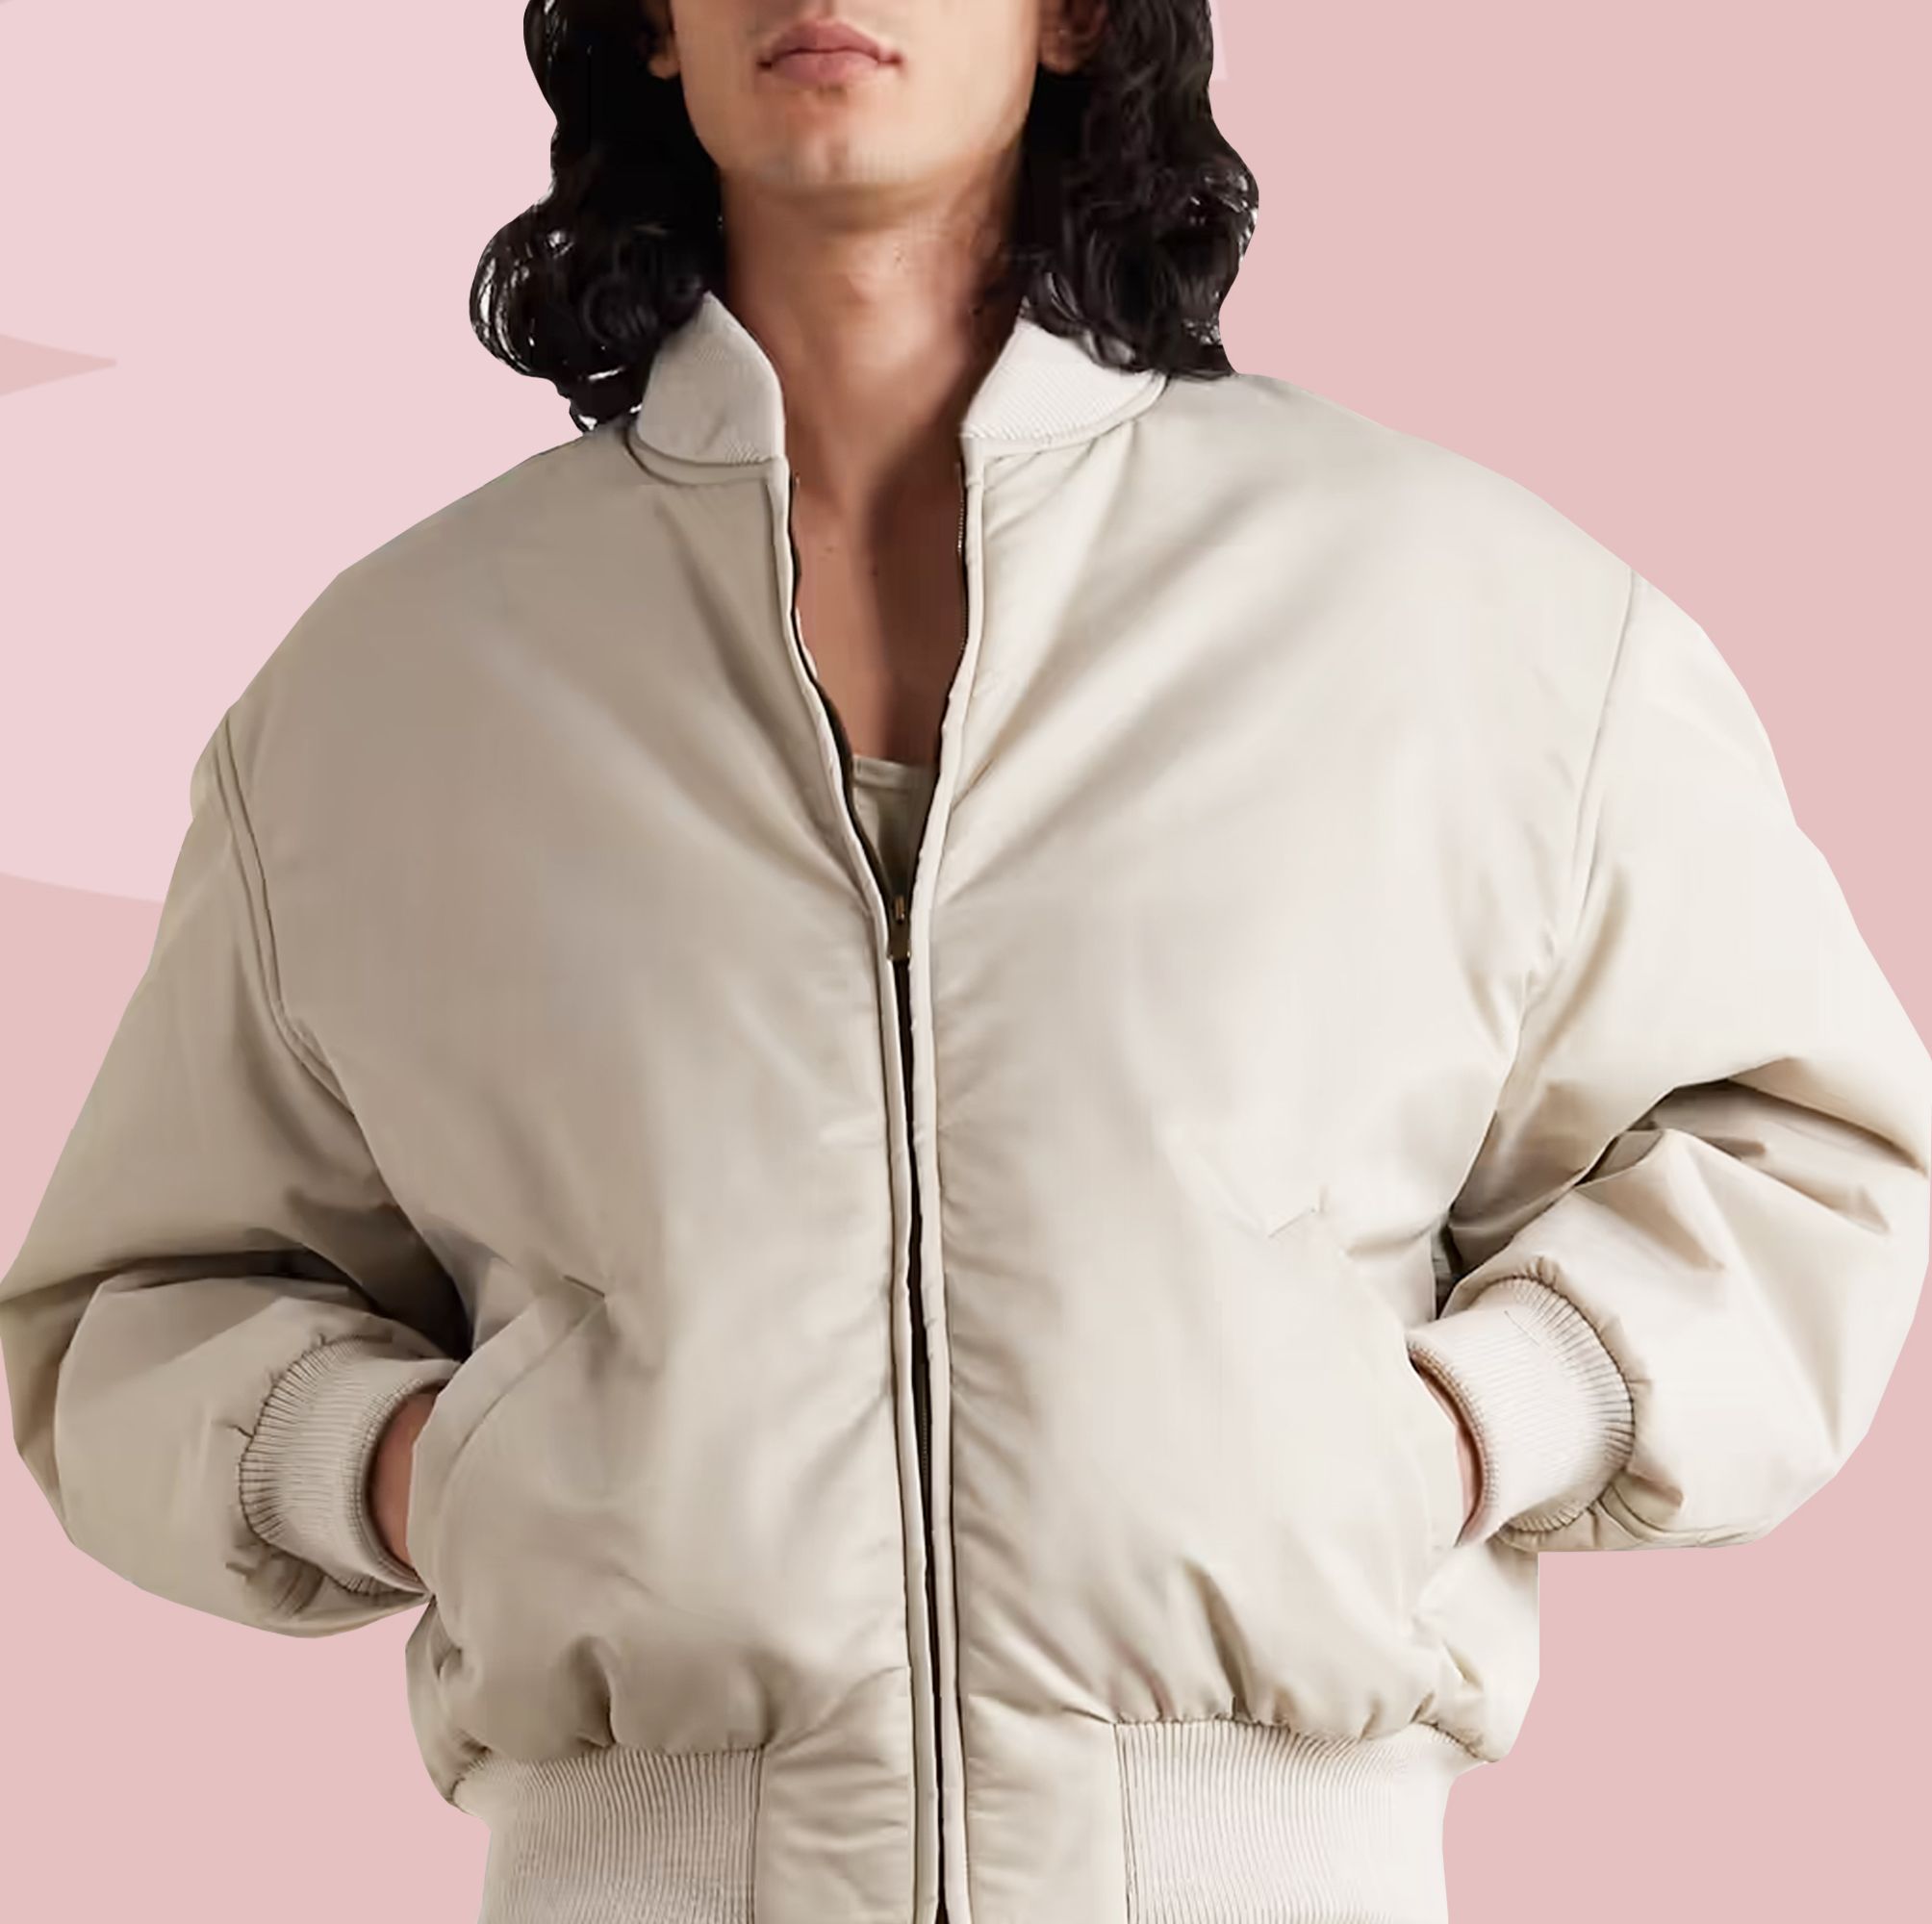 These Bomber Jackets Will Make You the Leading Man of Your Own Movie